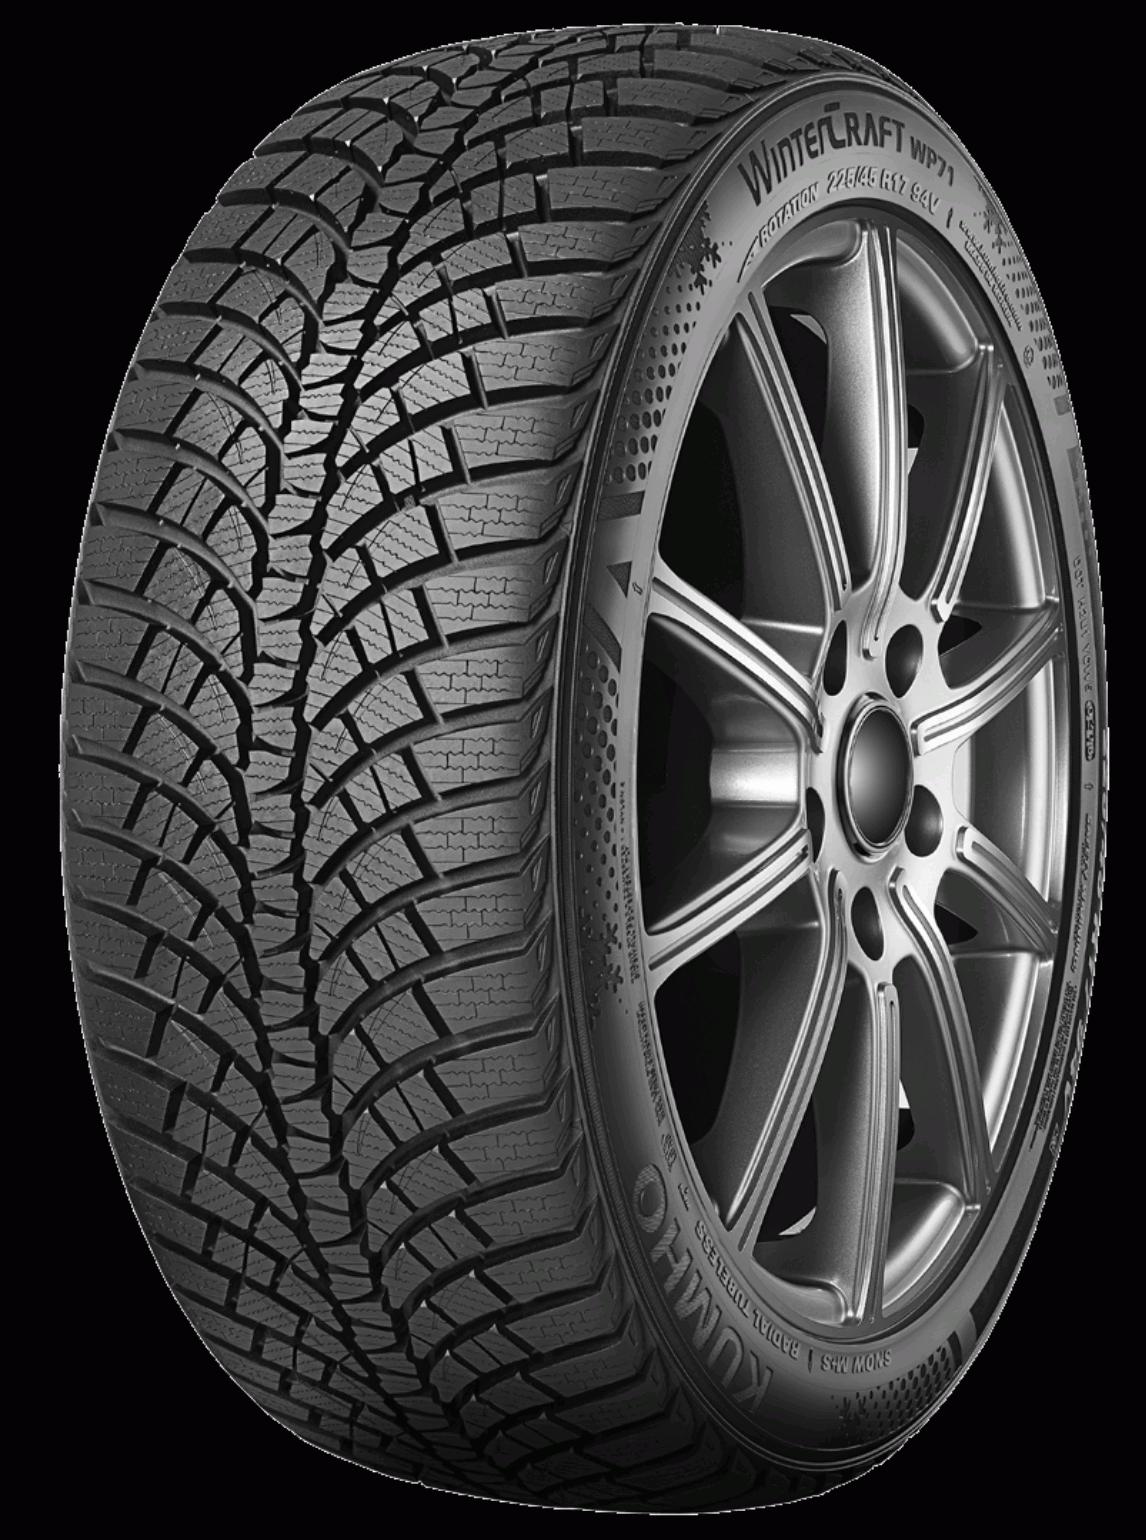 Tests Tyre WinterCraft Kumho Reviews WP71 - and